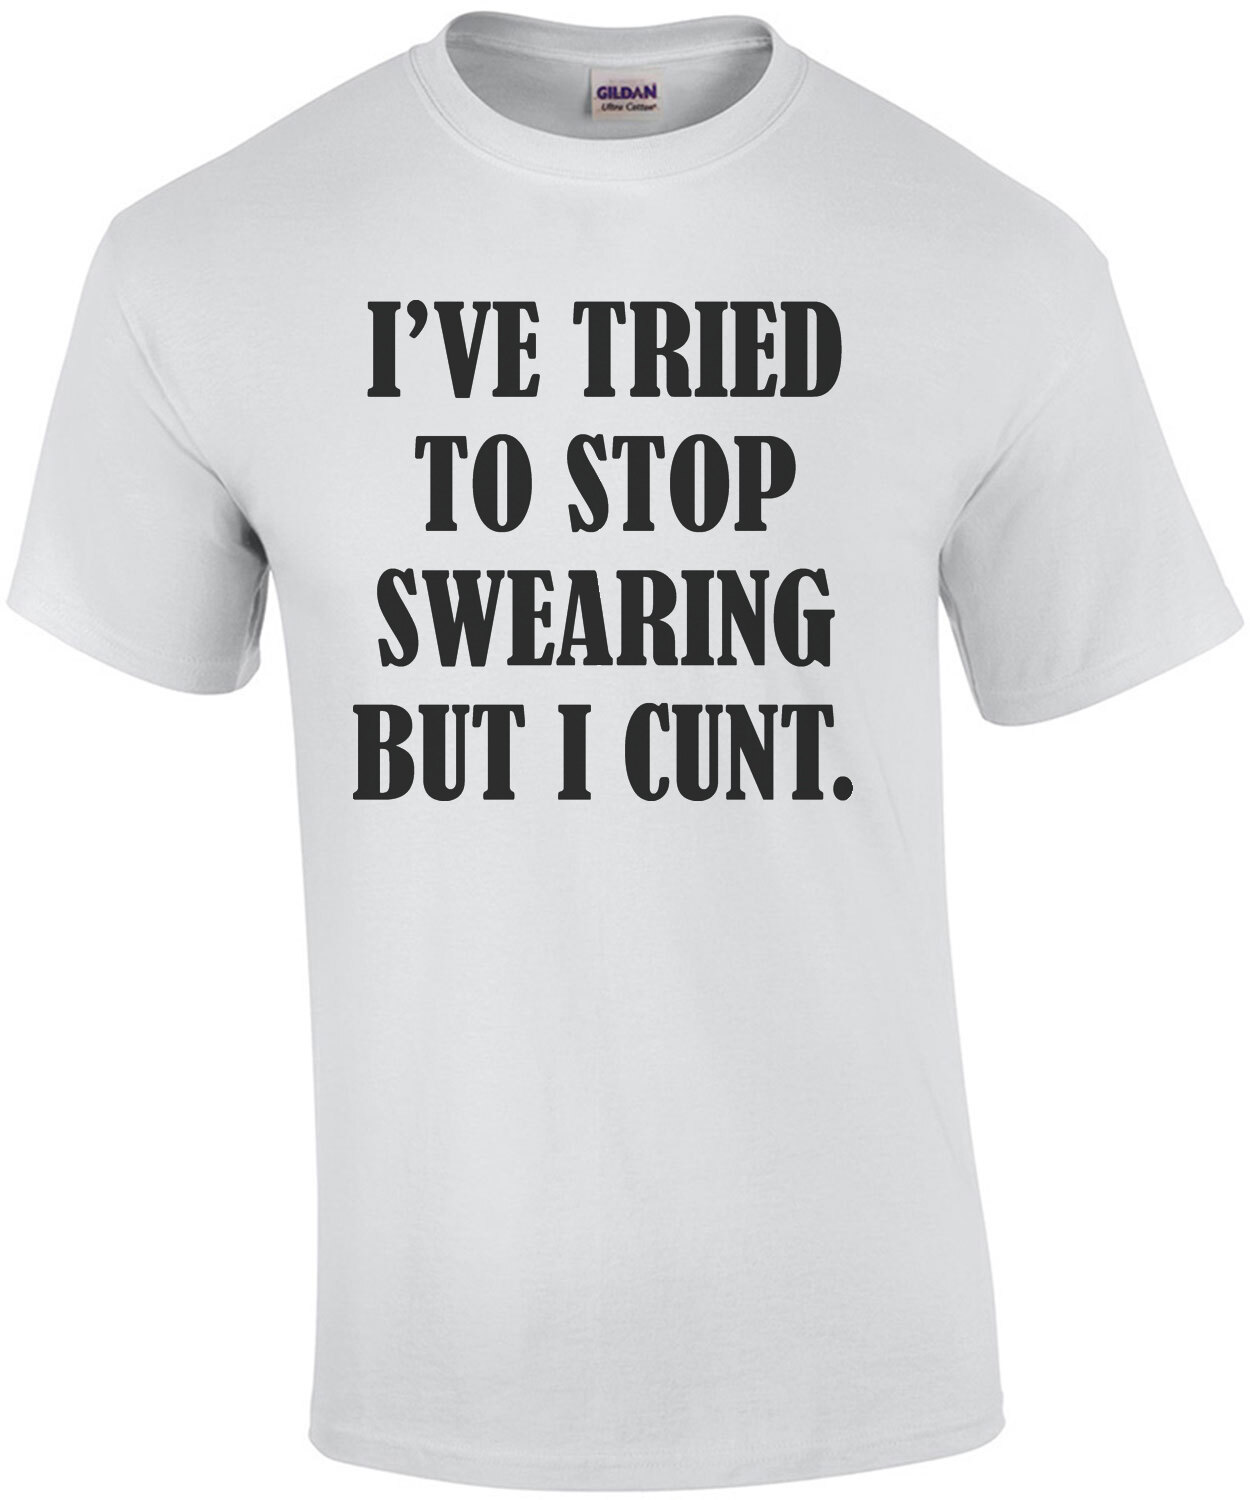 Ive Tried To Stop Swearing But I Cunt Funny Sarcastic T Shirt 